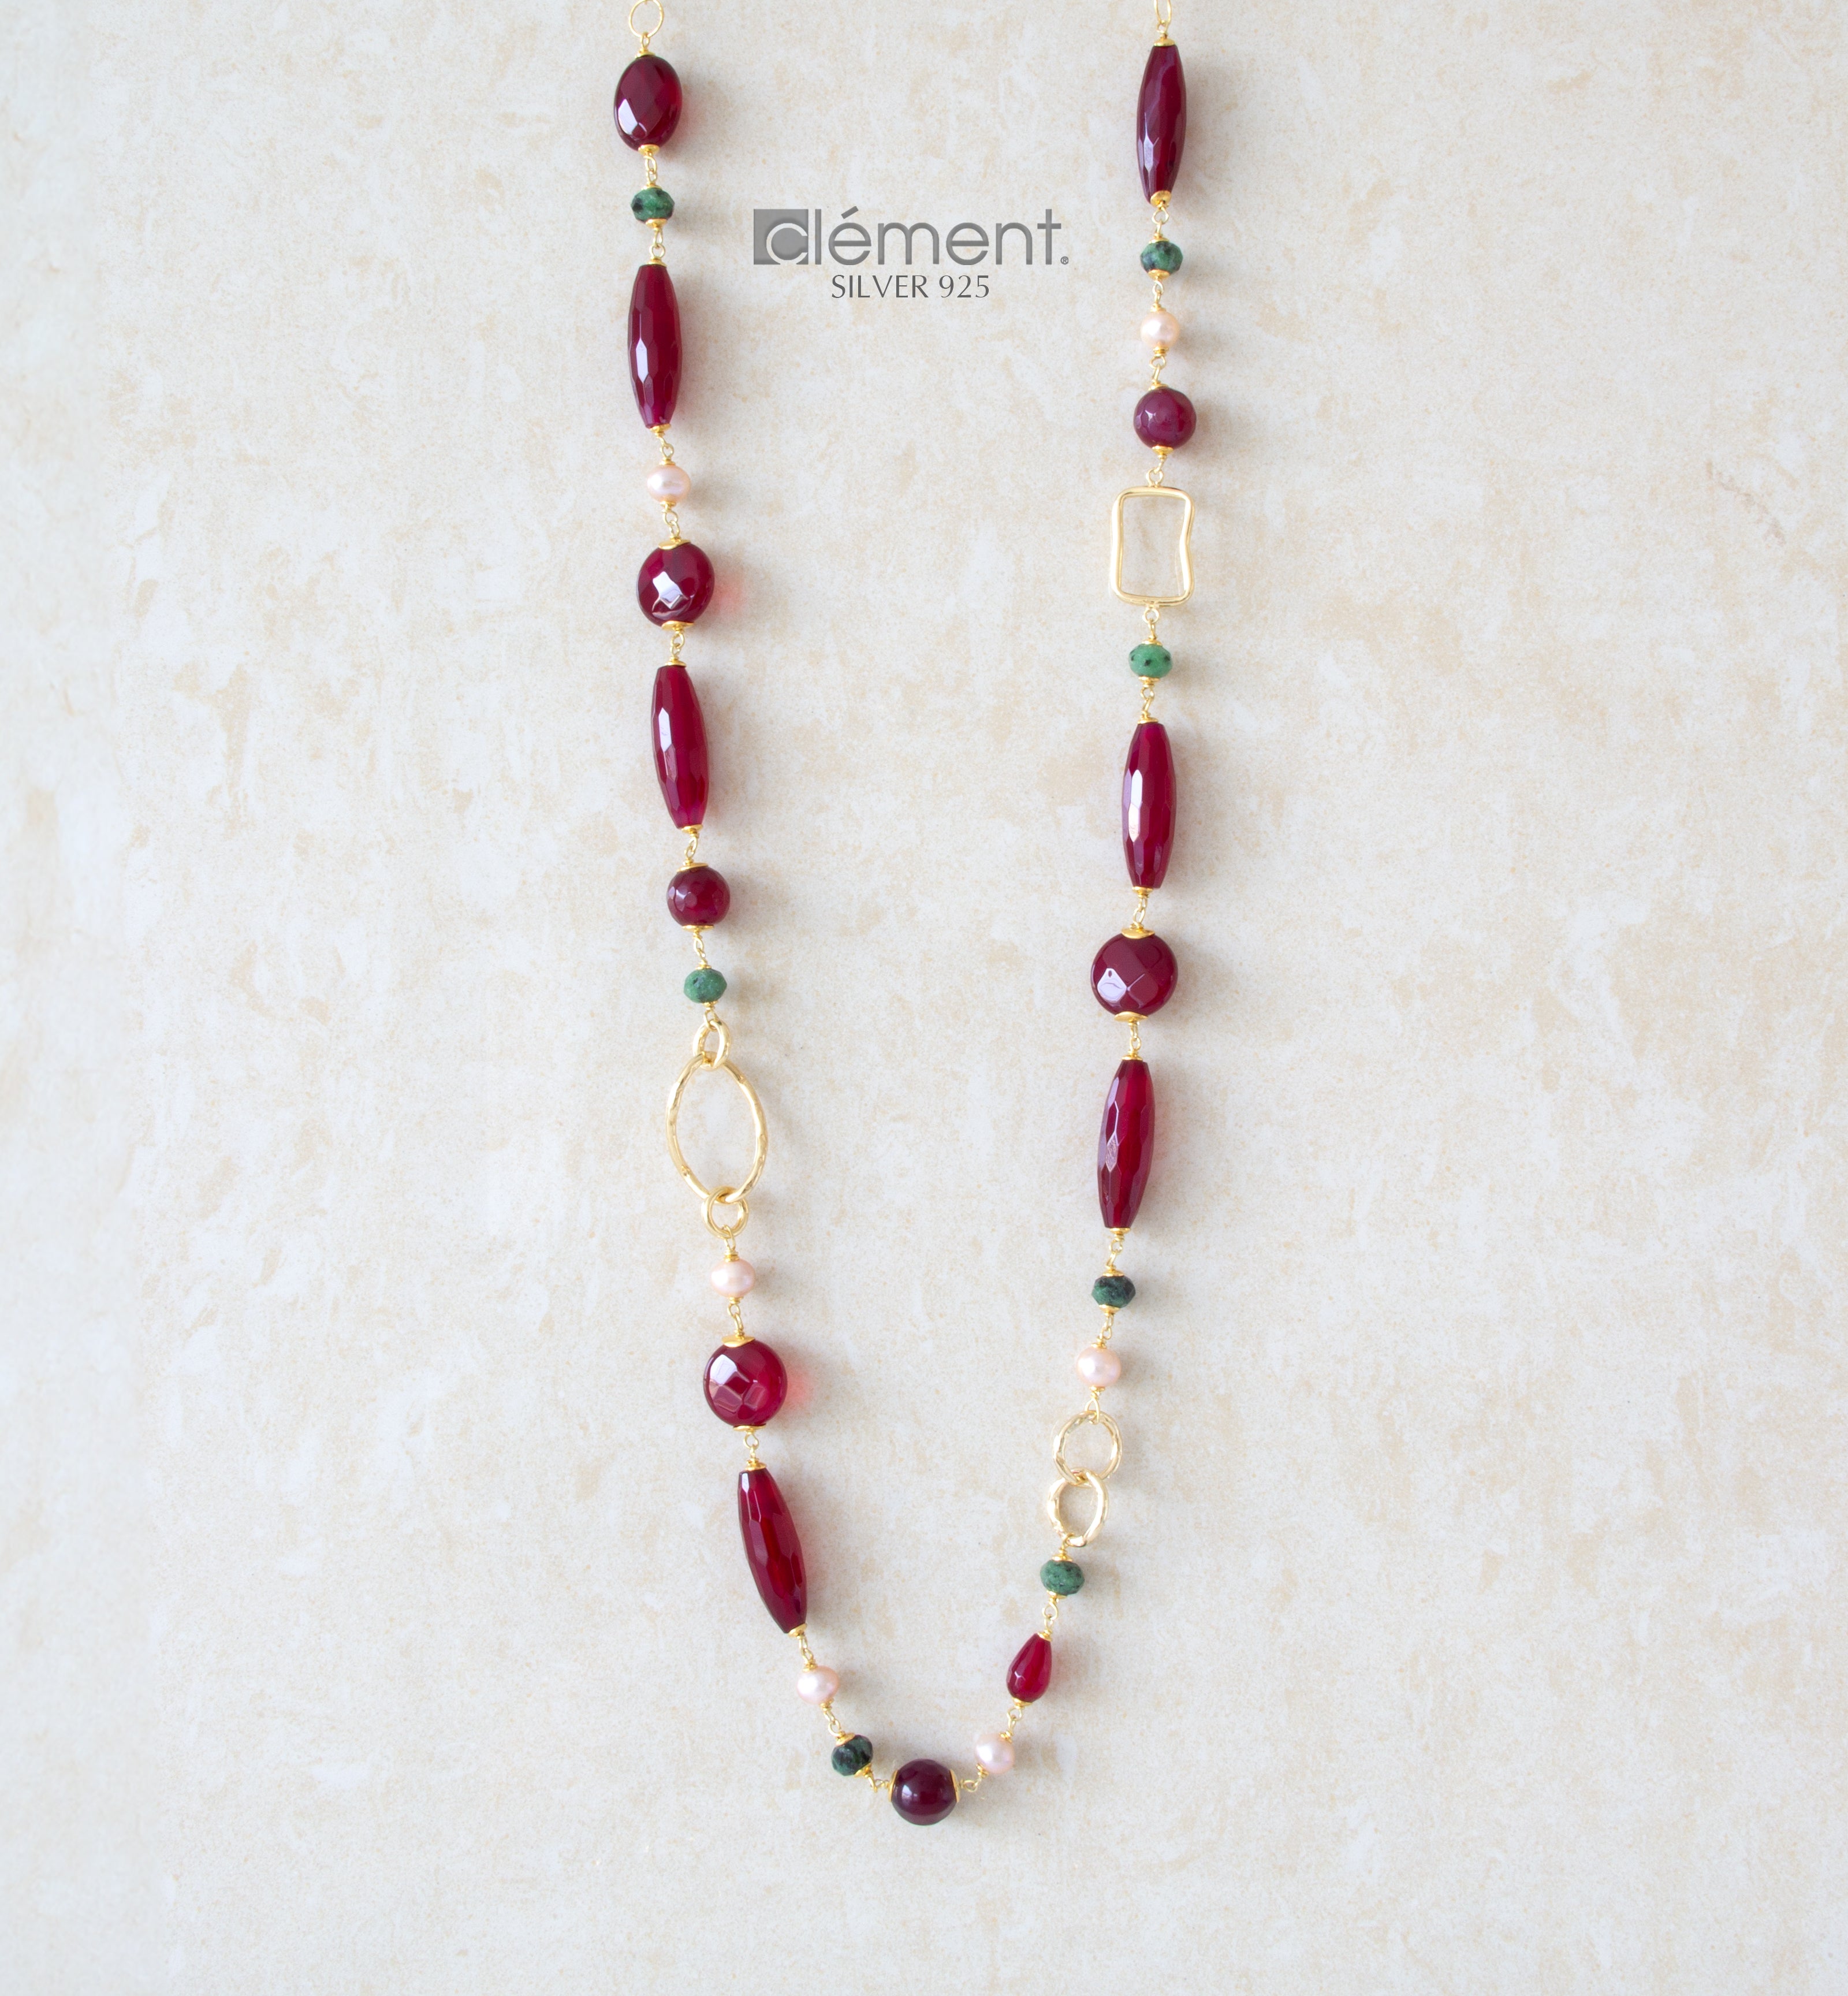 Silver 925 Long Necklace with Semi-Precious Stones and Pearls